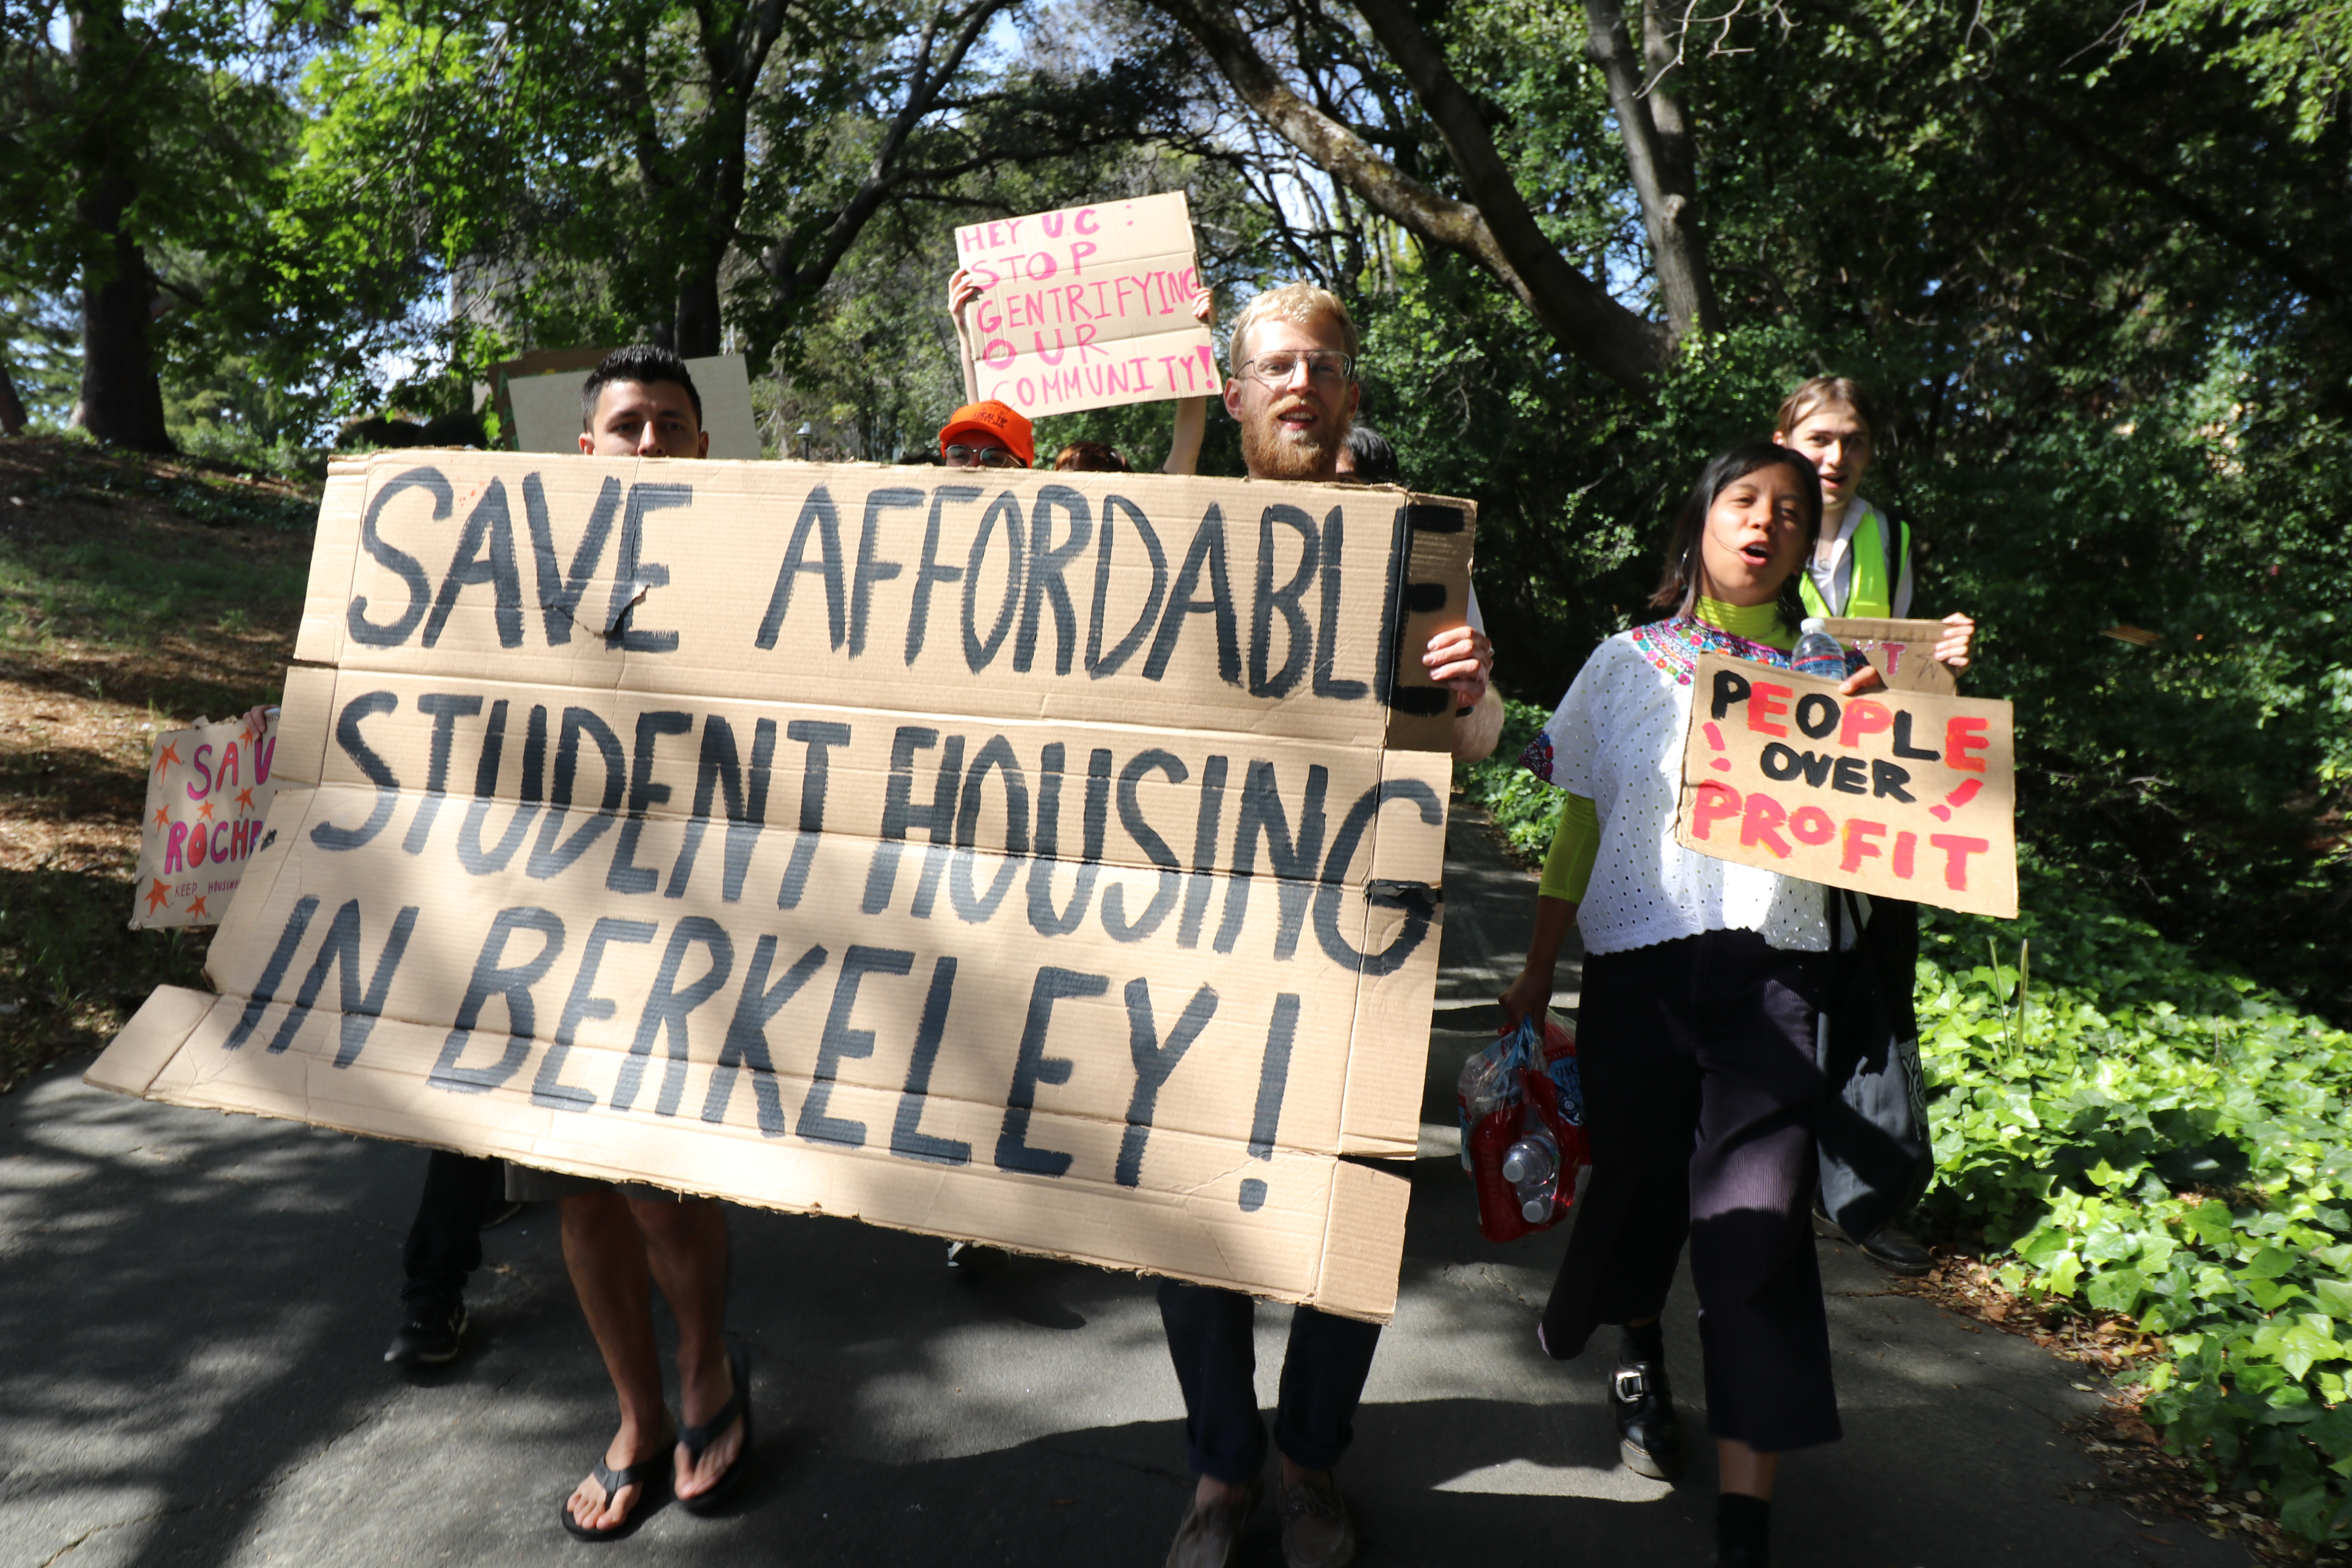 Students marching with signs that read save affordable student housing in Berkeley